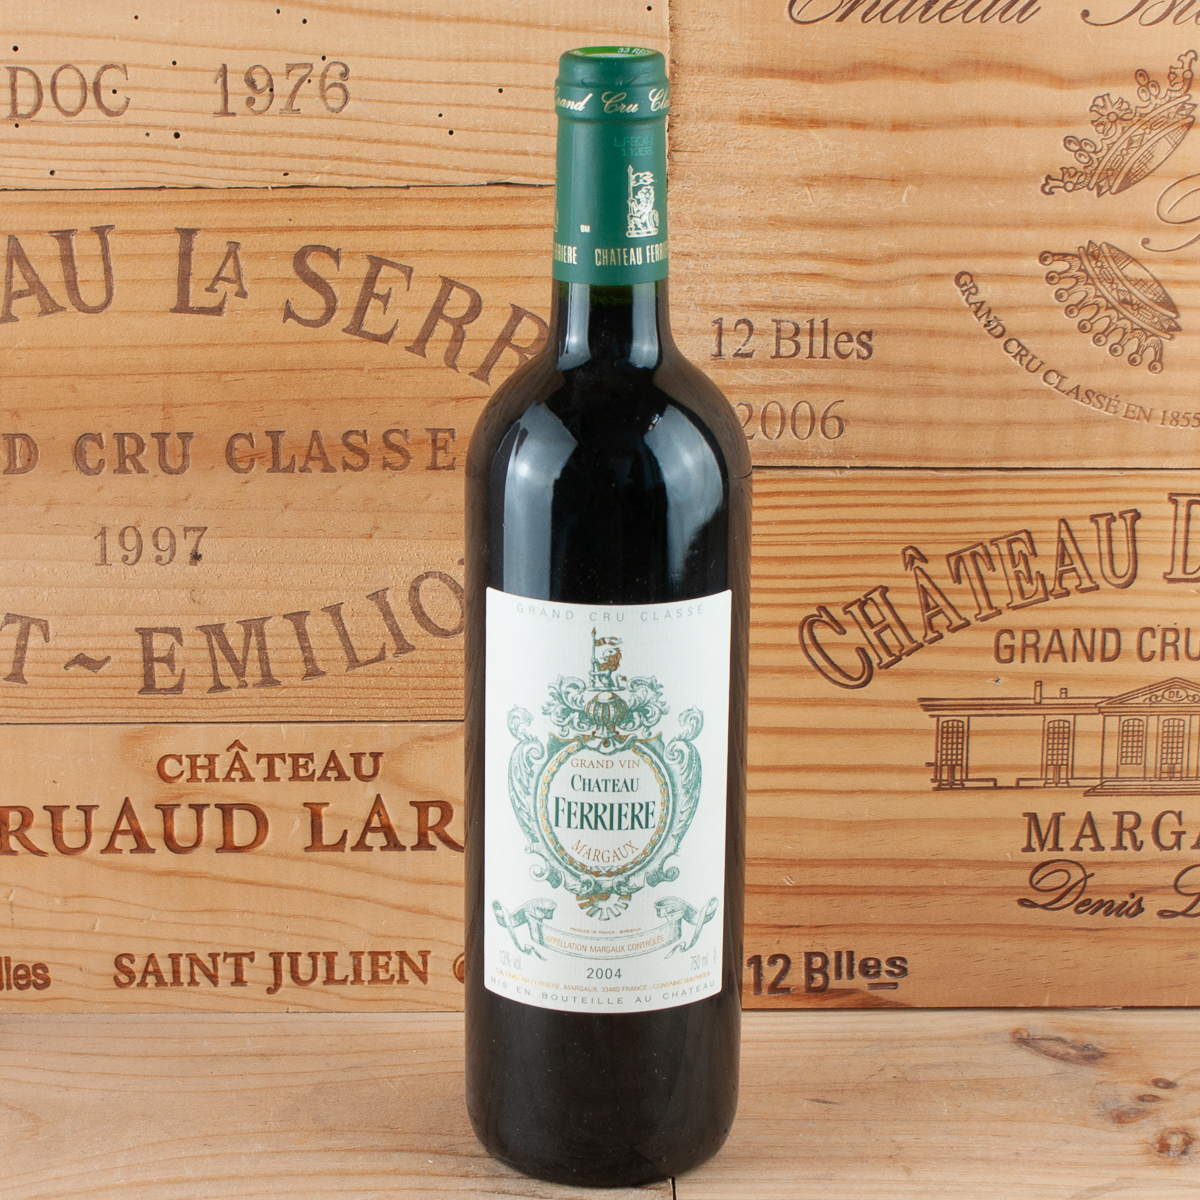 2004 Chateau Ferriere